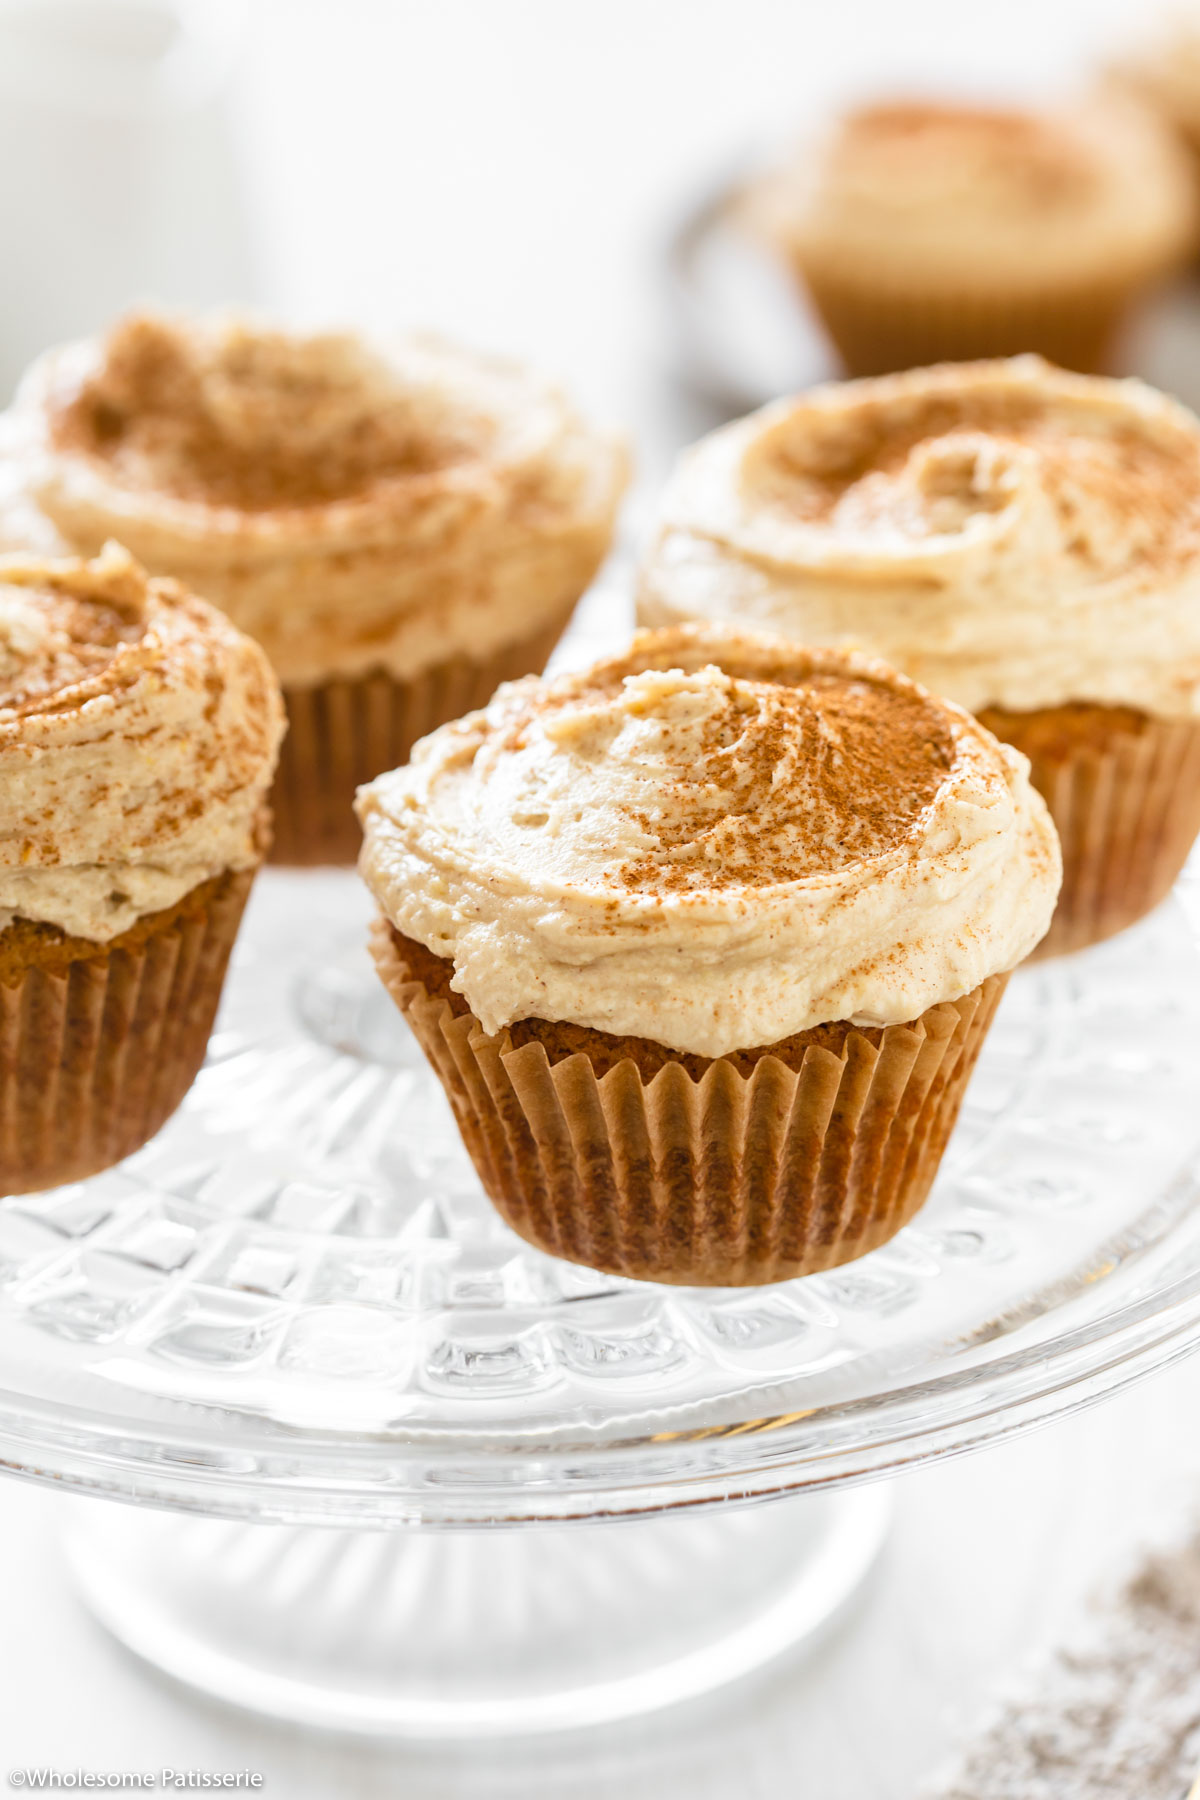 The cupcakes frosted and dusted with cinnamon.